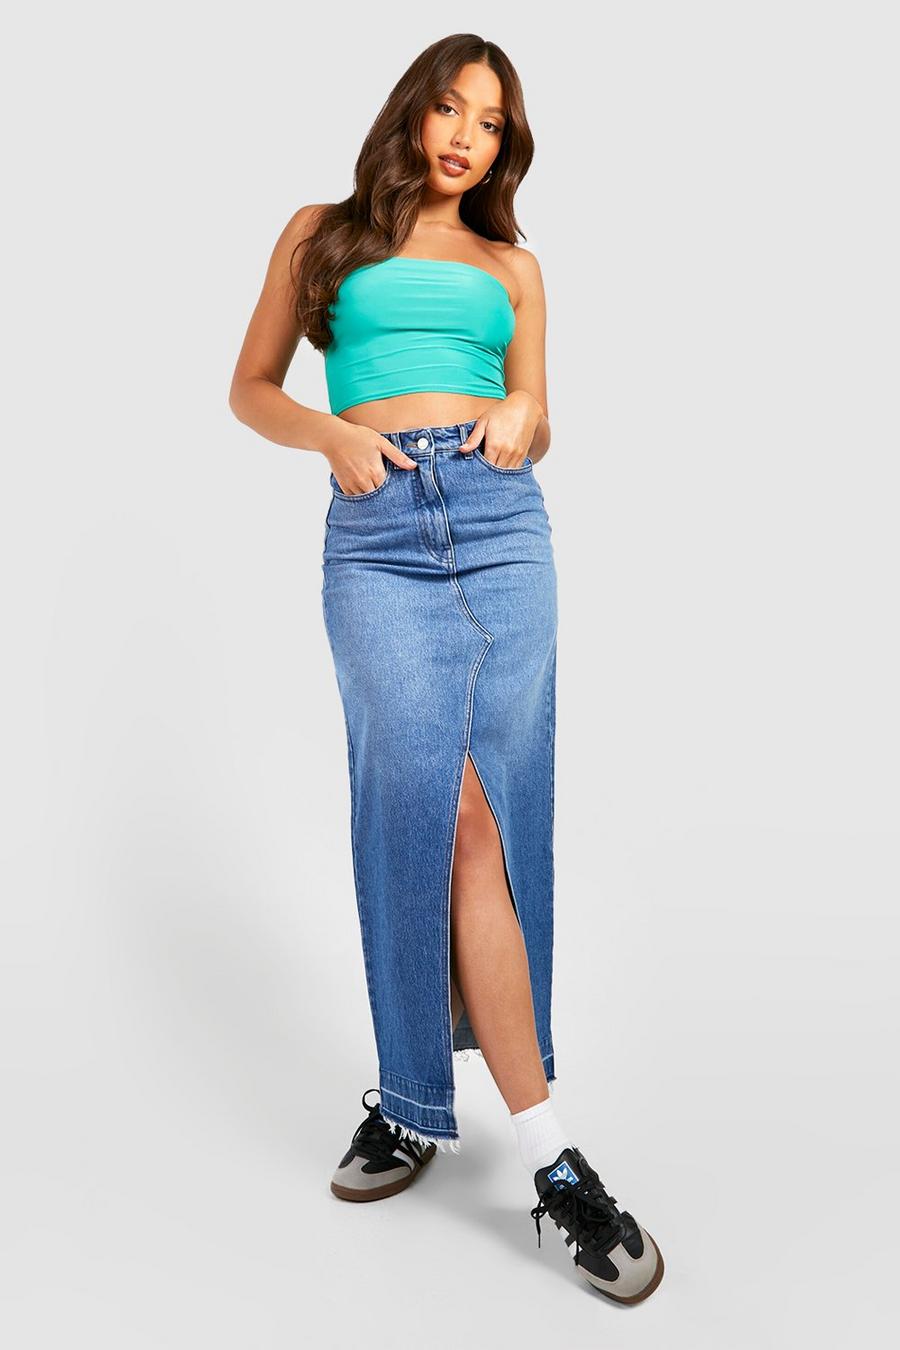 Turquoise Tall Glansig bandeau crop top